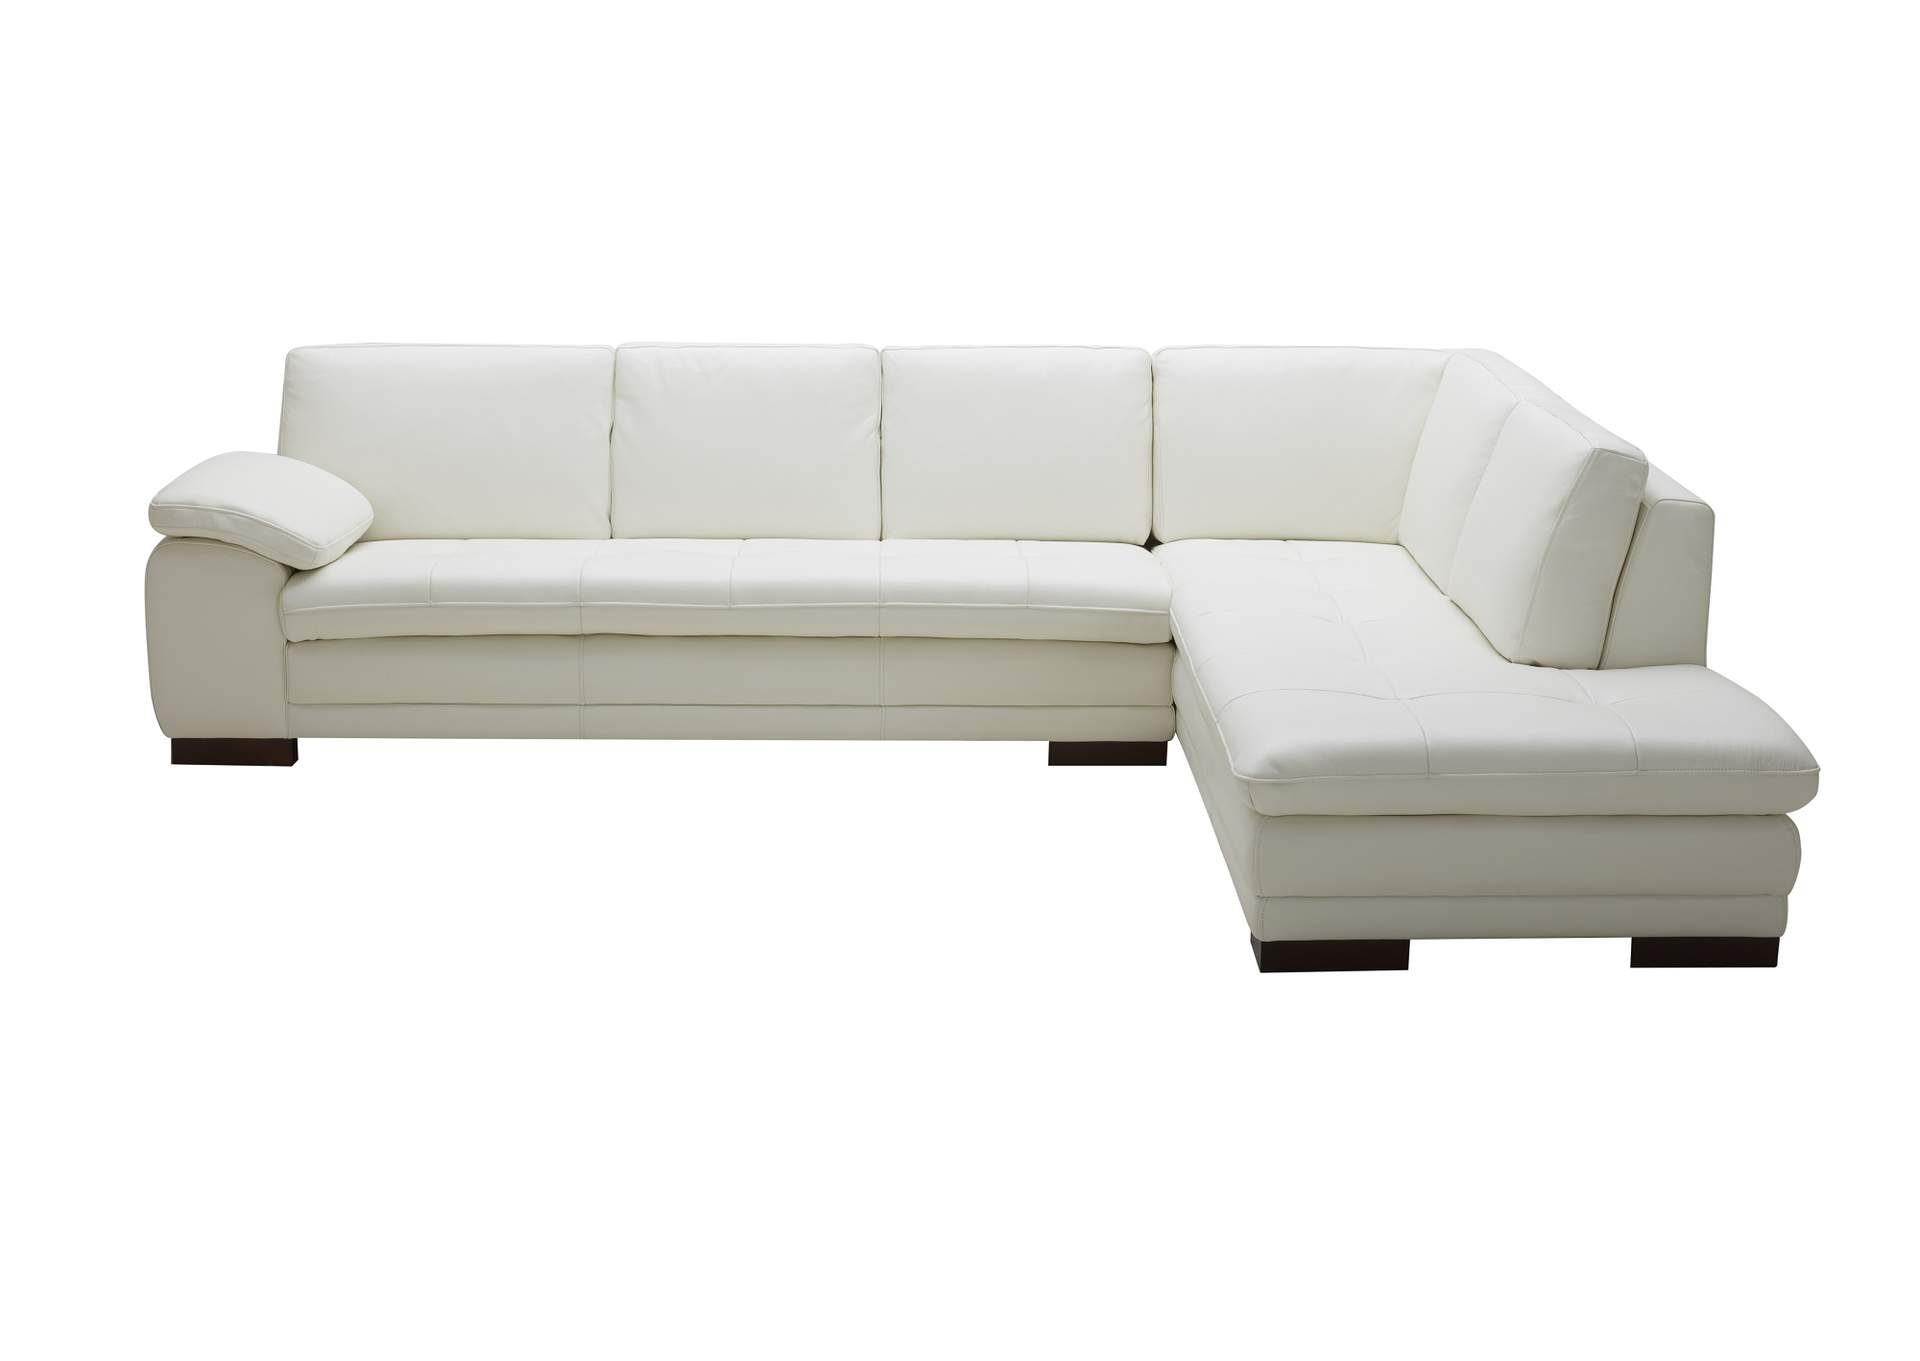 625 Italian Leather Sectional White in Right Hand Facing,J&M Furniture